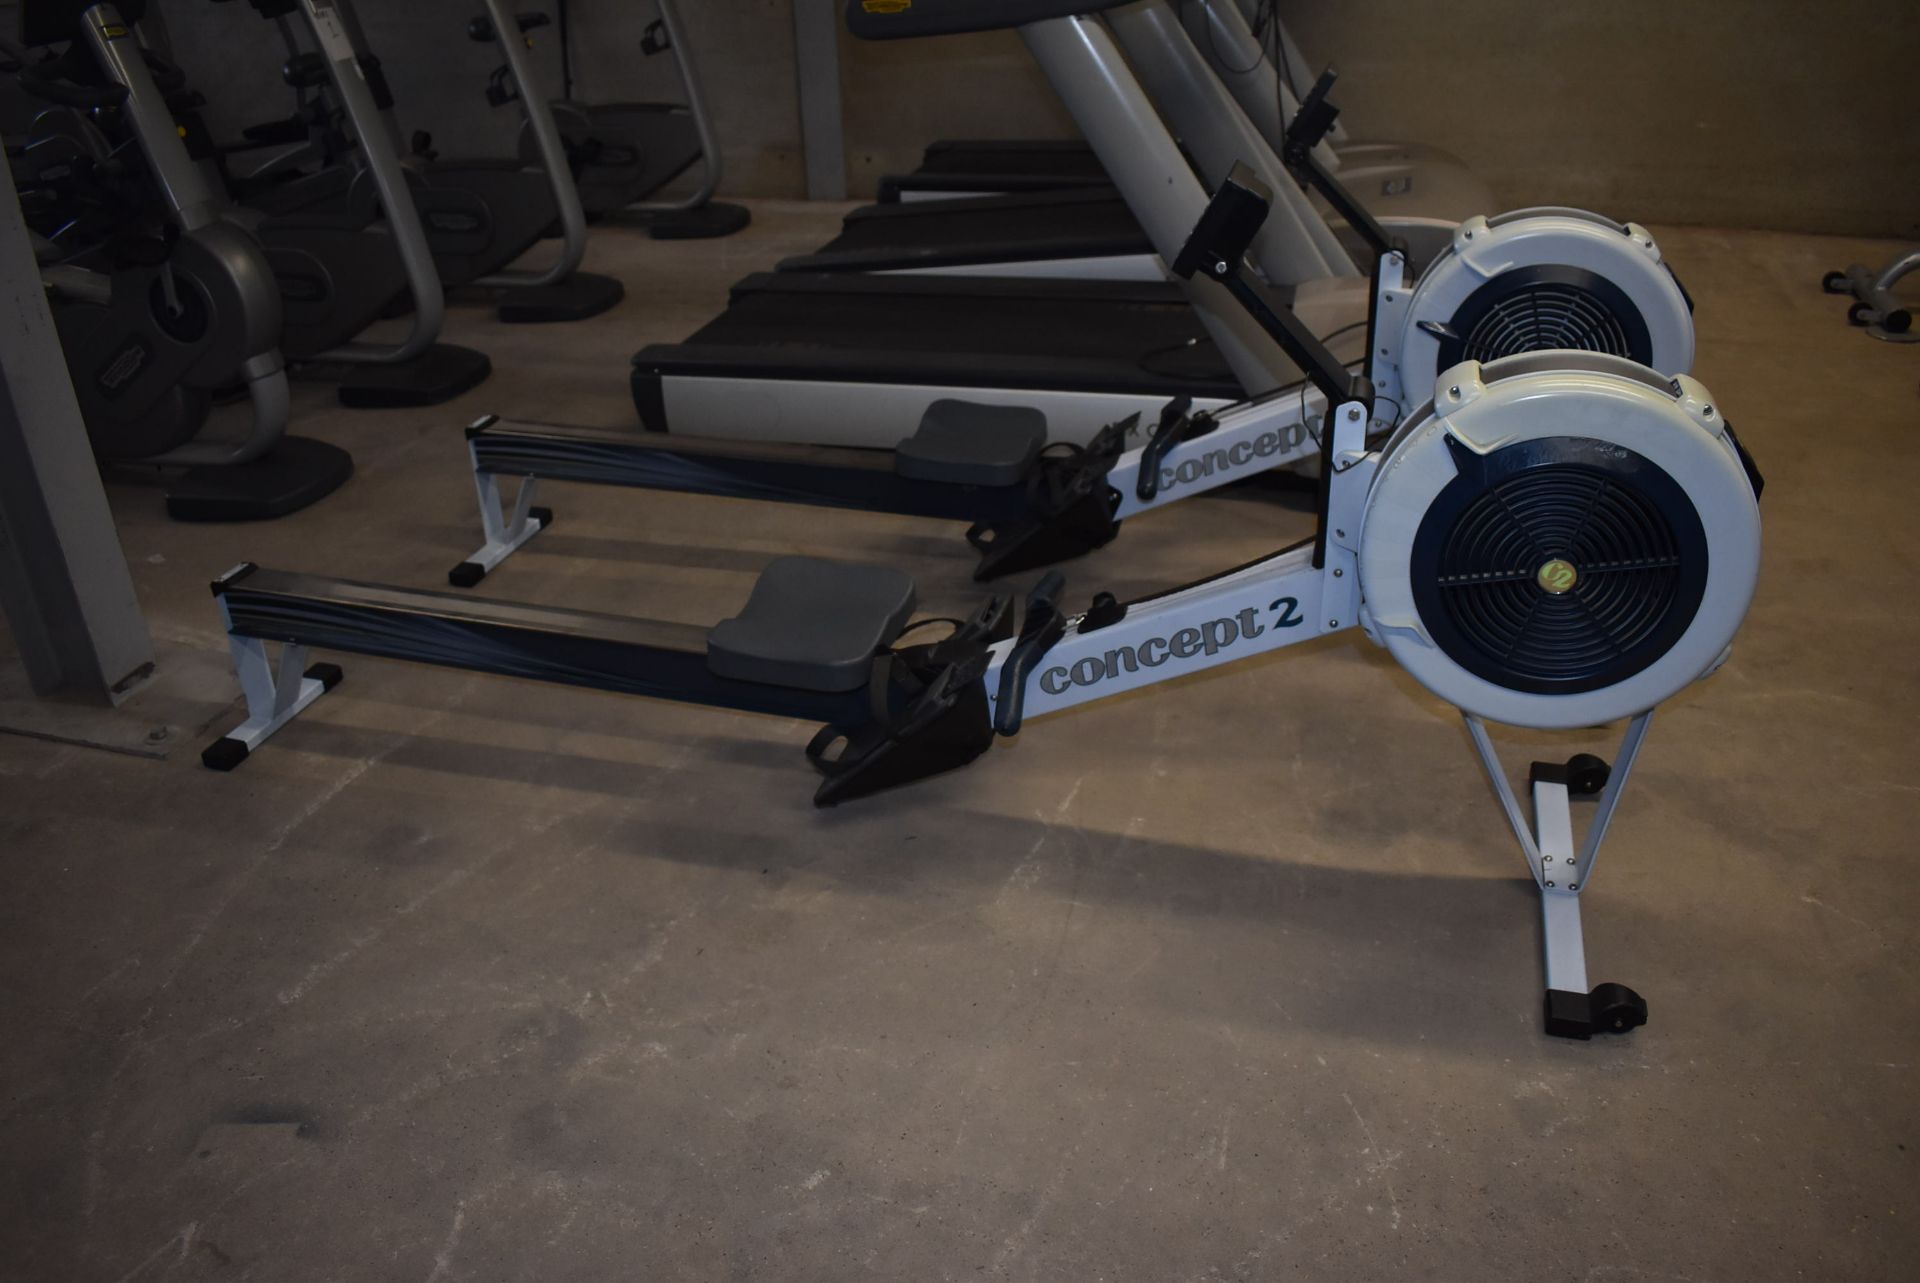 *Concept 2 Air Rower with PM3 Digital Display - Image 2 of 2